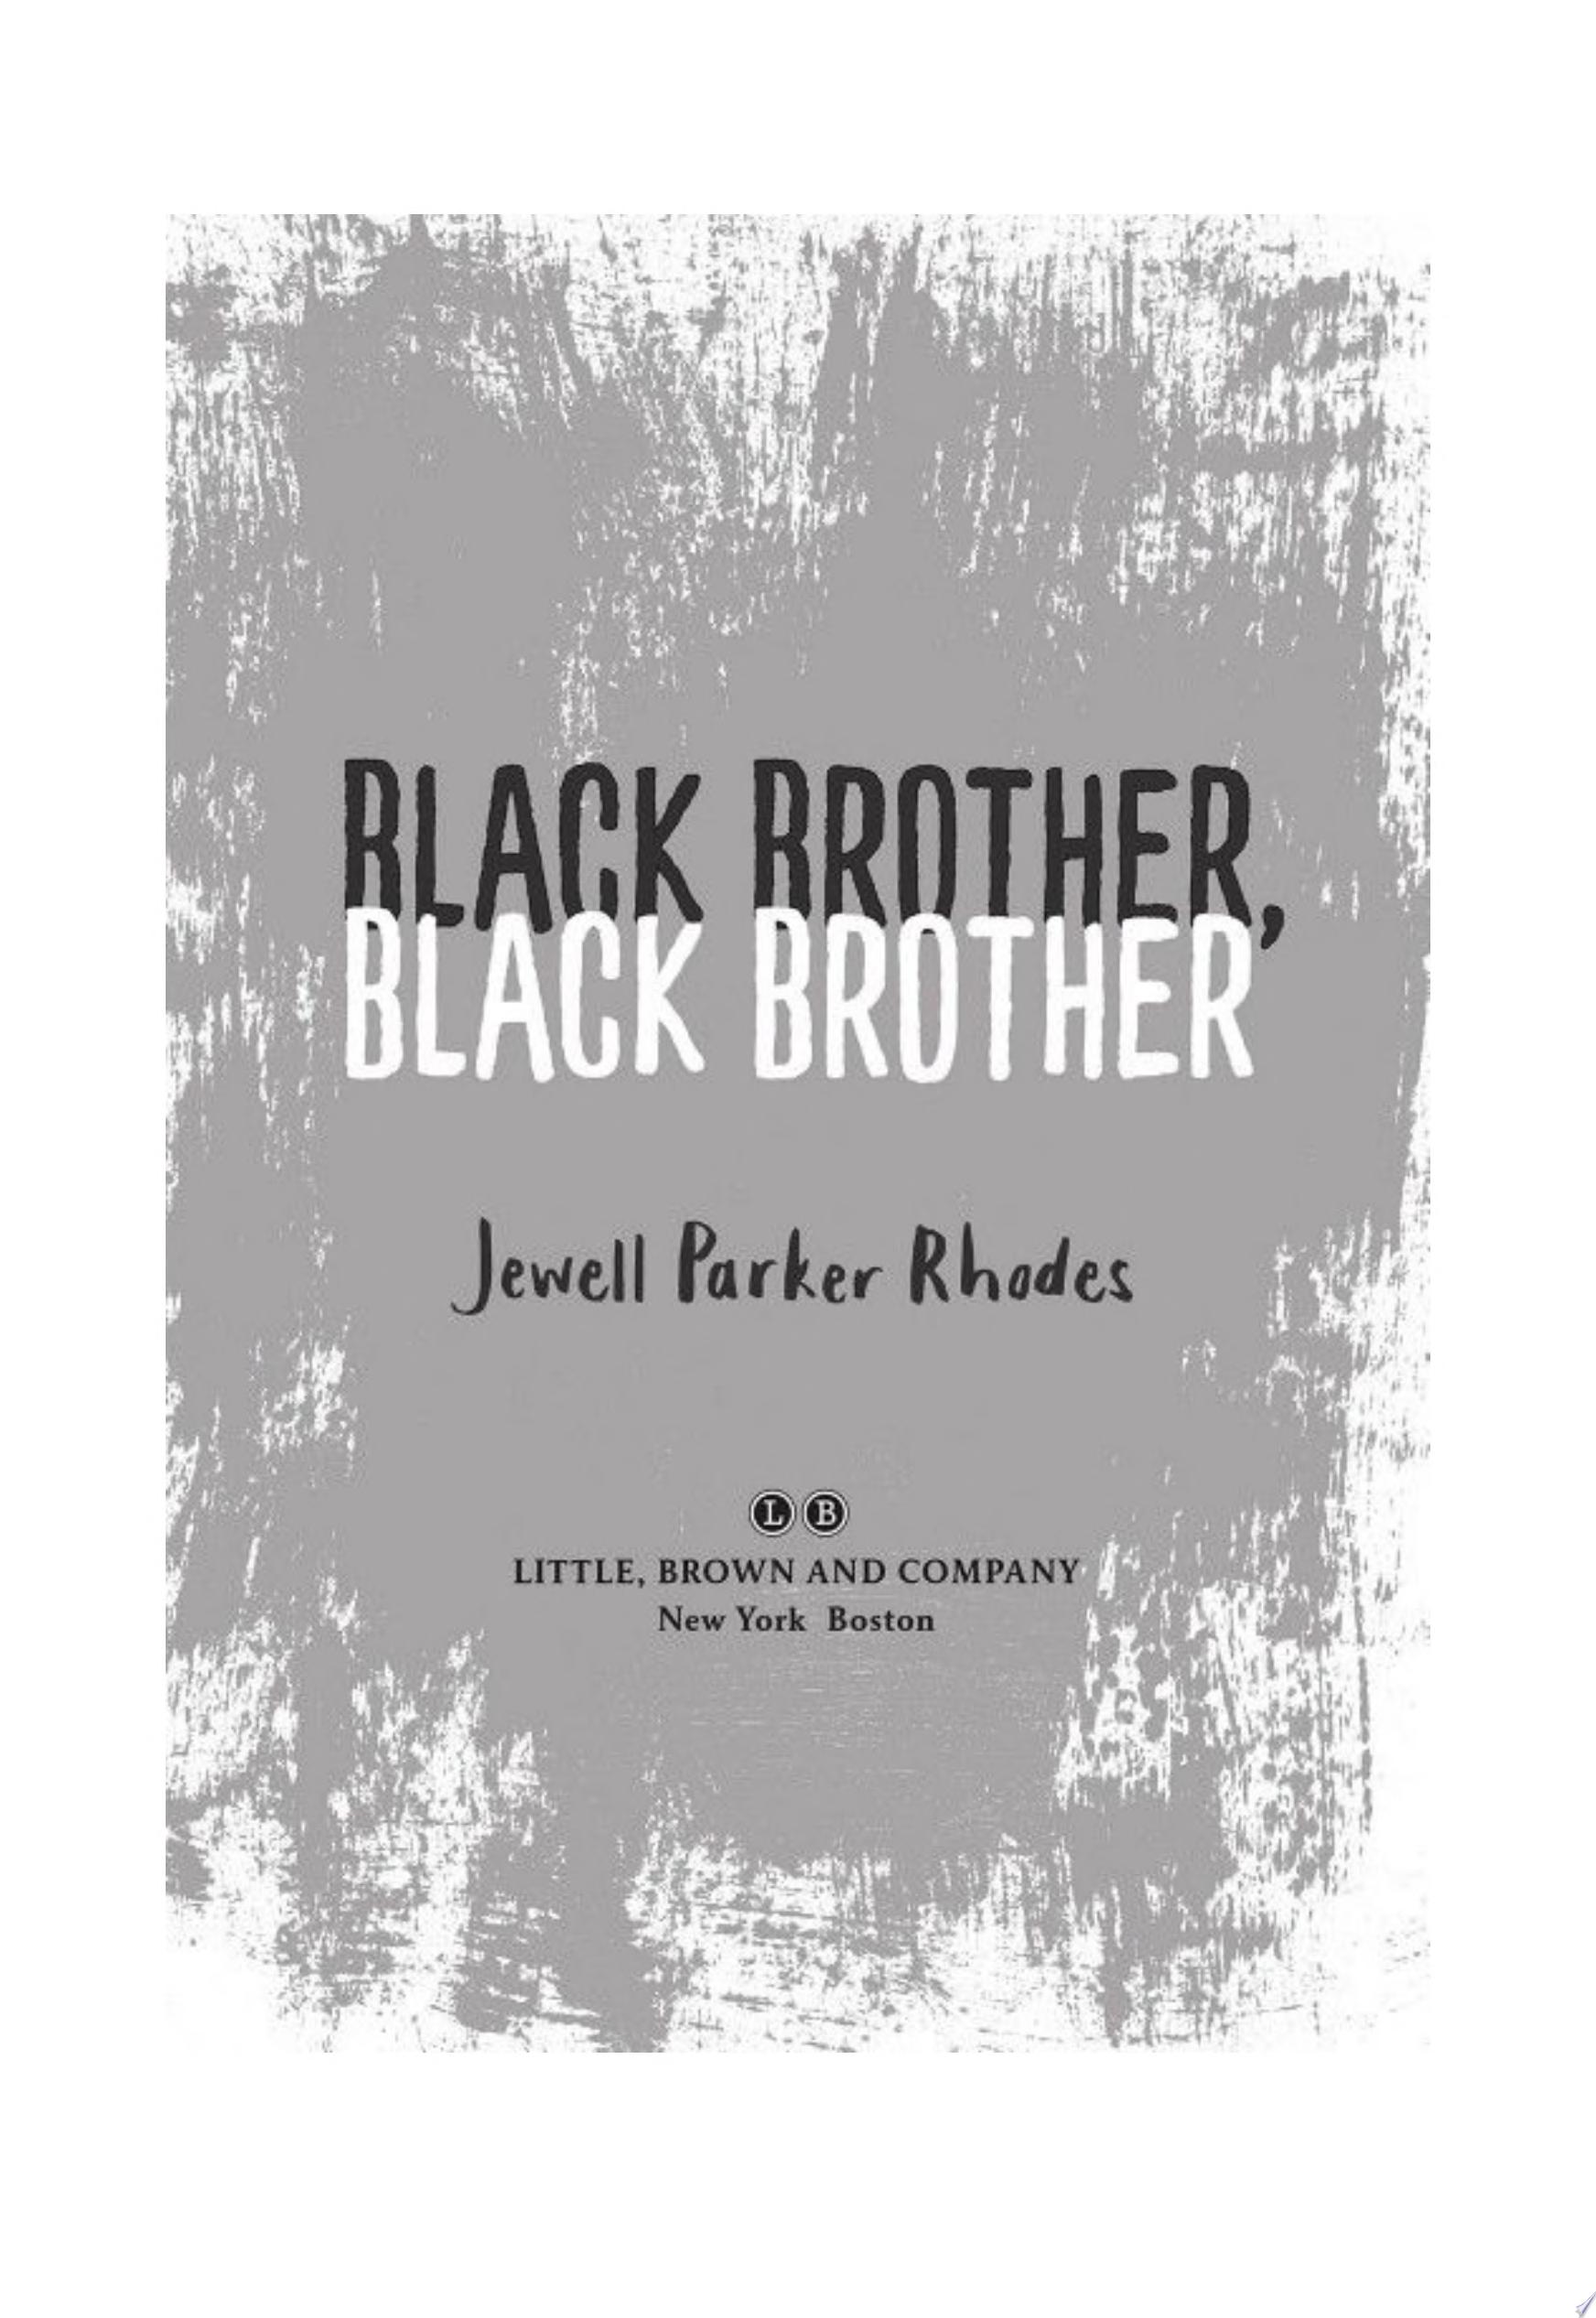 Image for "Black Brother, Black Brother"